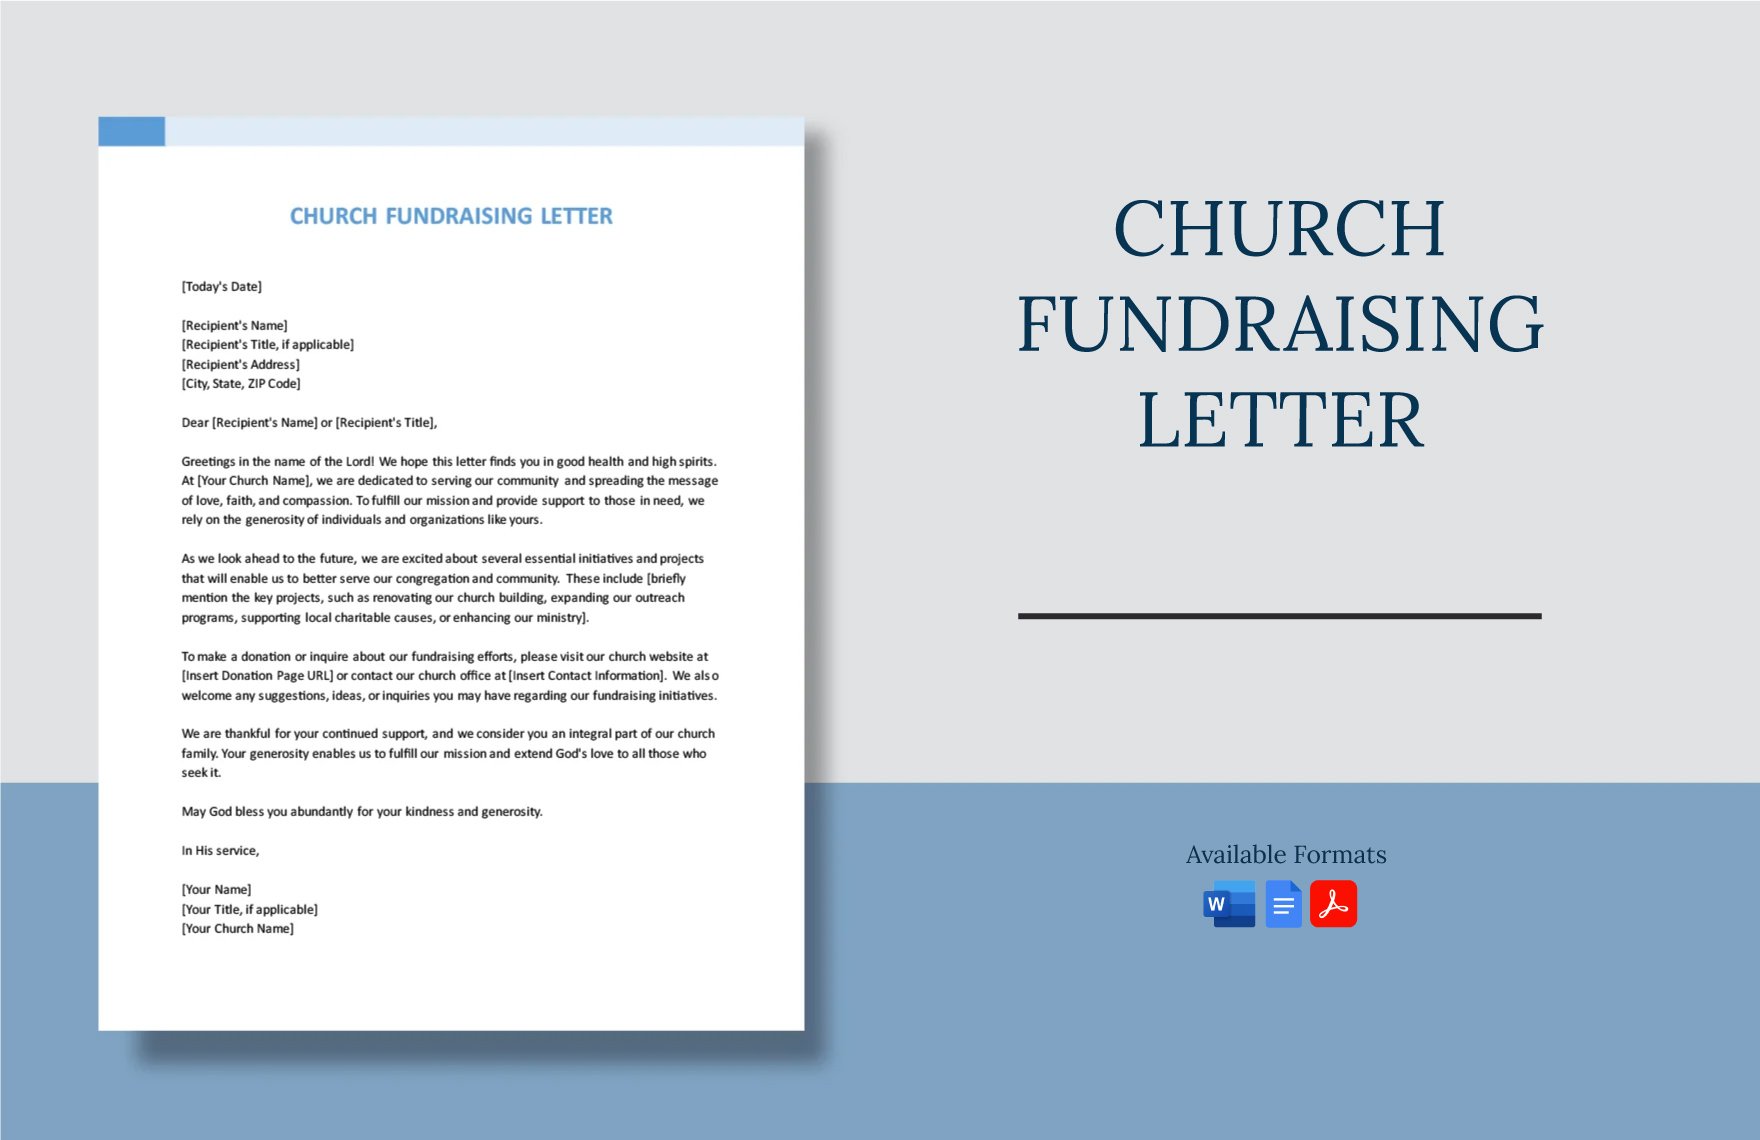 Church Fundraising Letter in Word, Google Docs, PDF